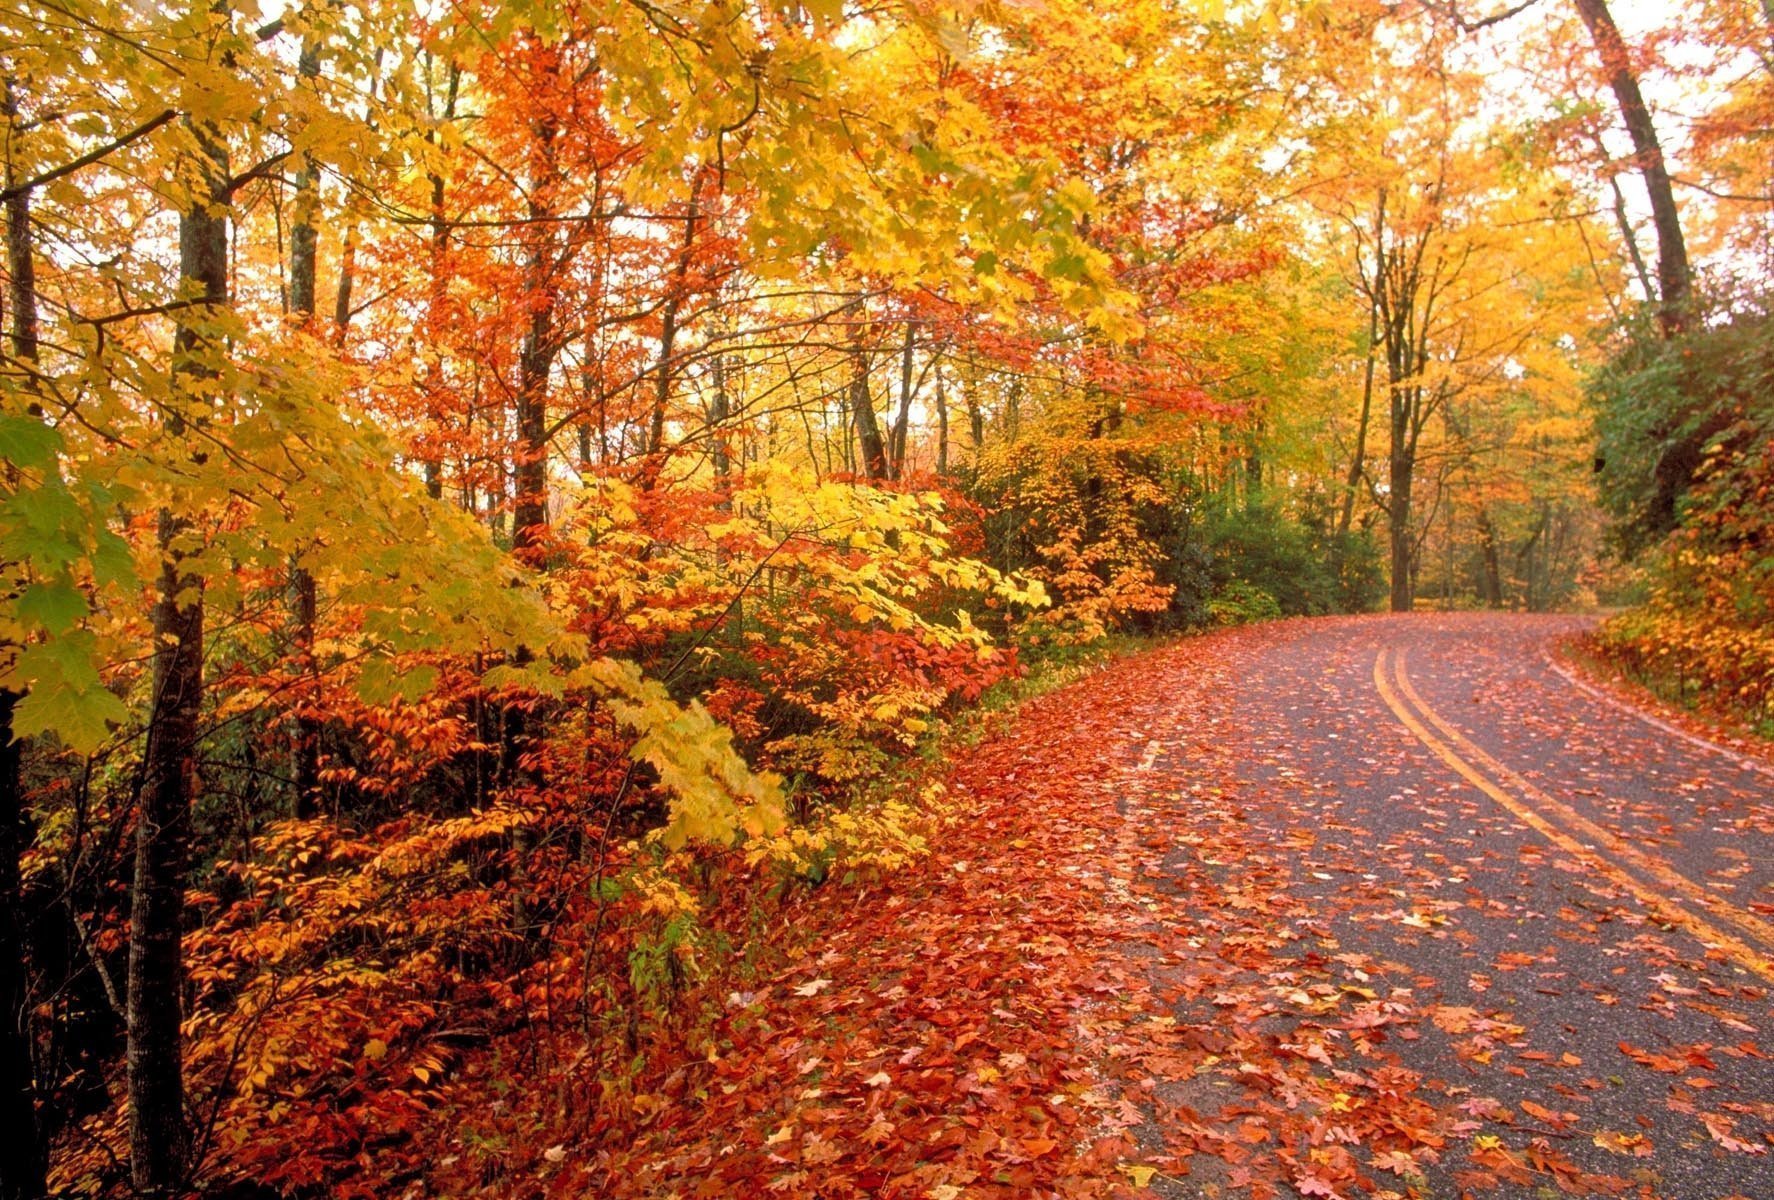 What can Pennsylvania expect in fall foliage this year? | PennLive.com